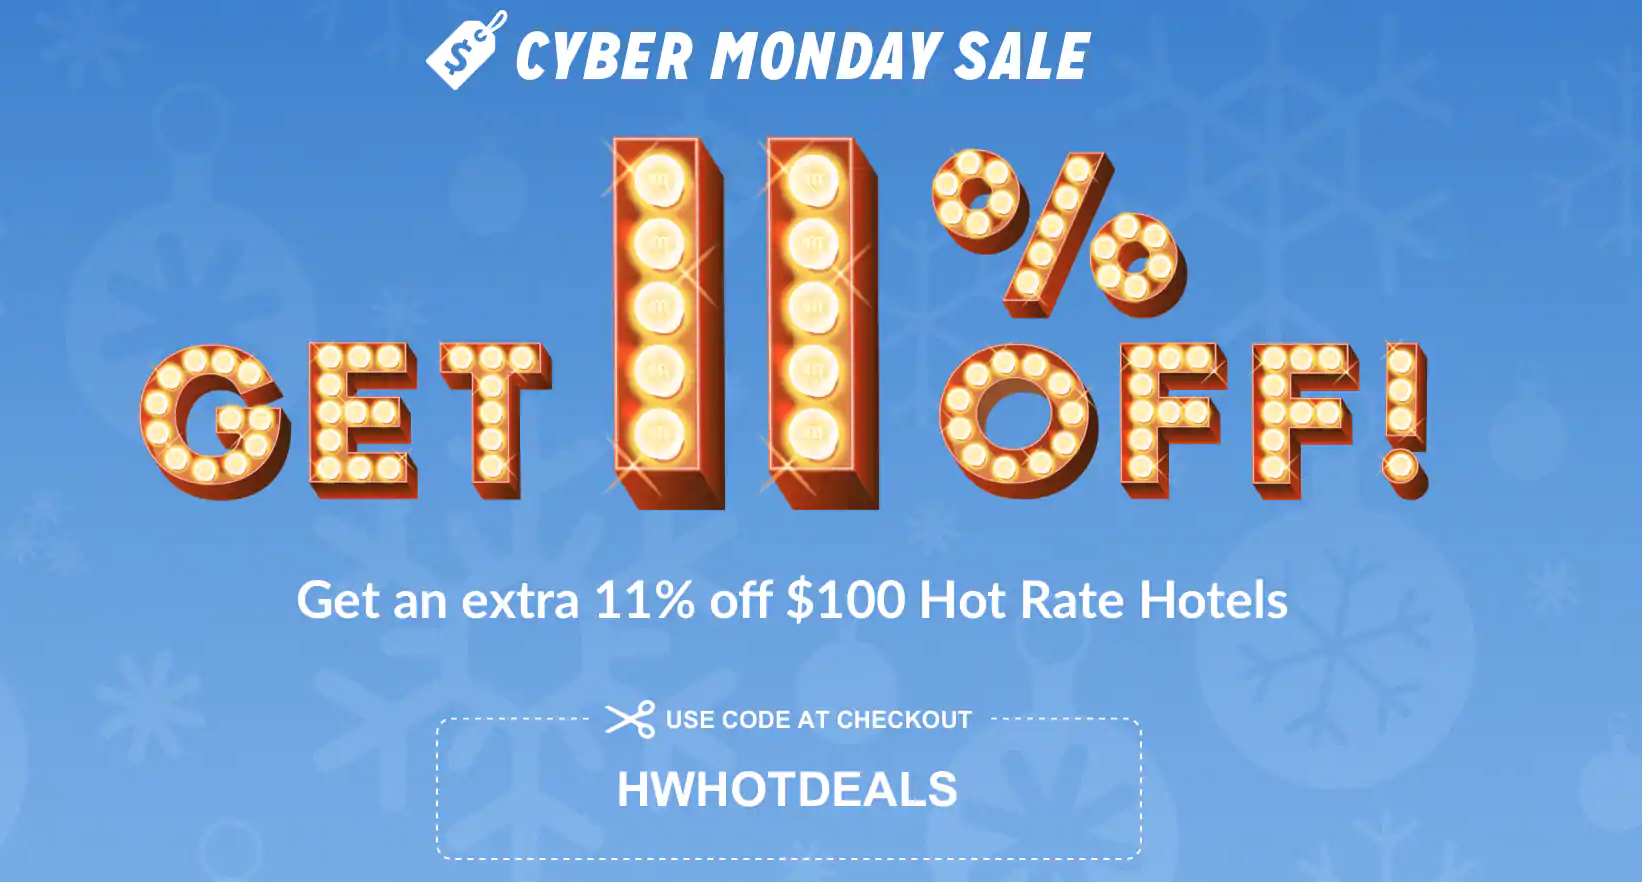 a advertisement for a cyber monday sale